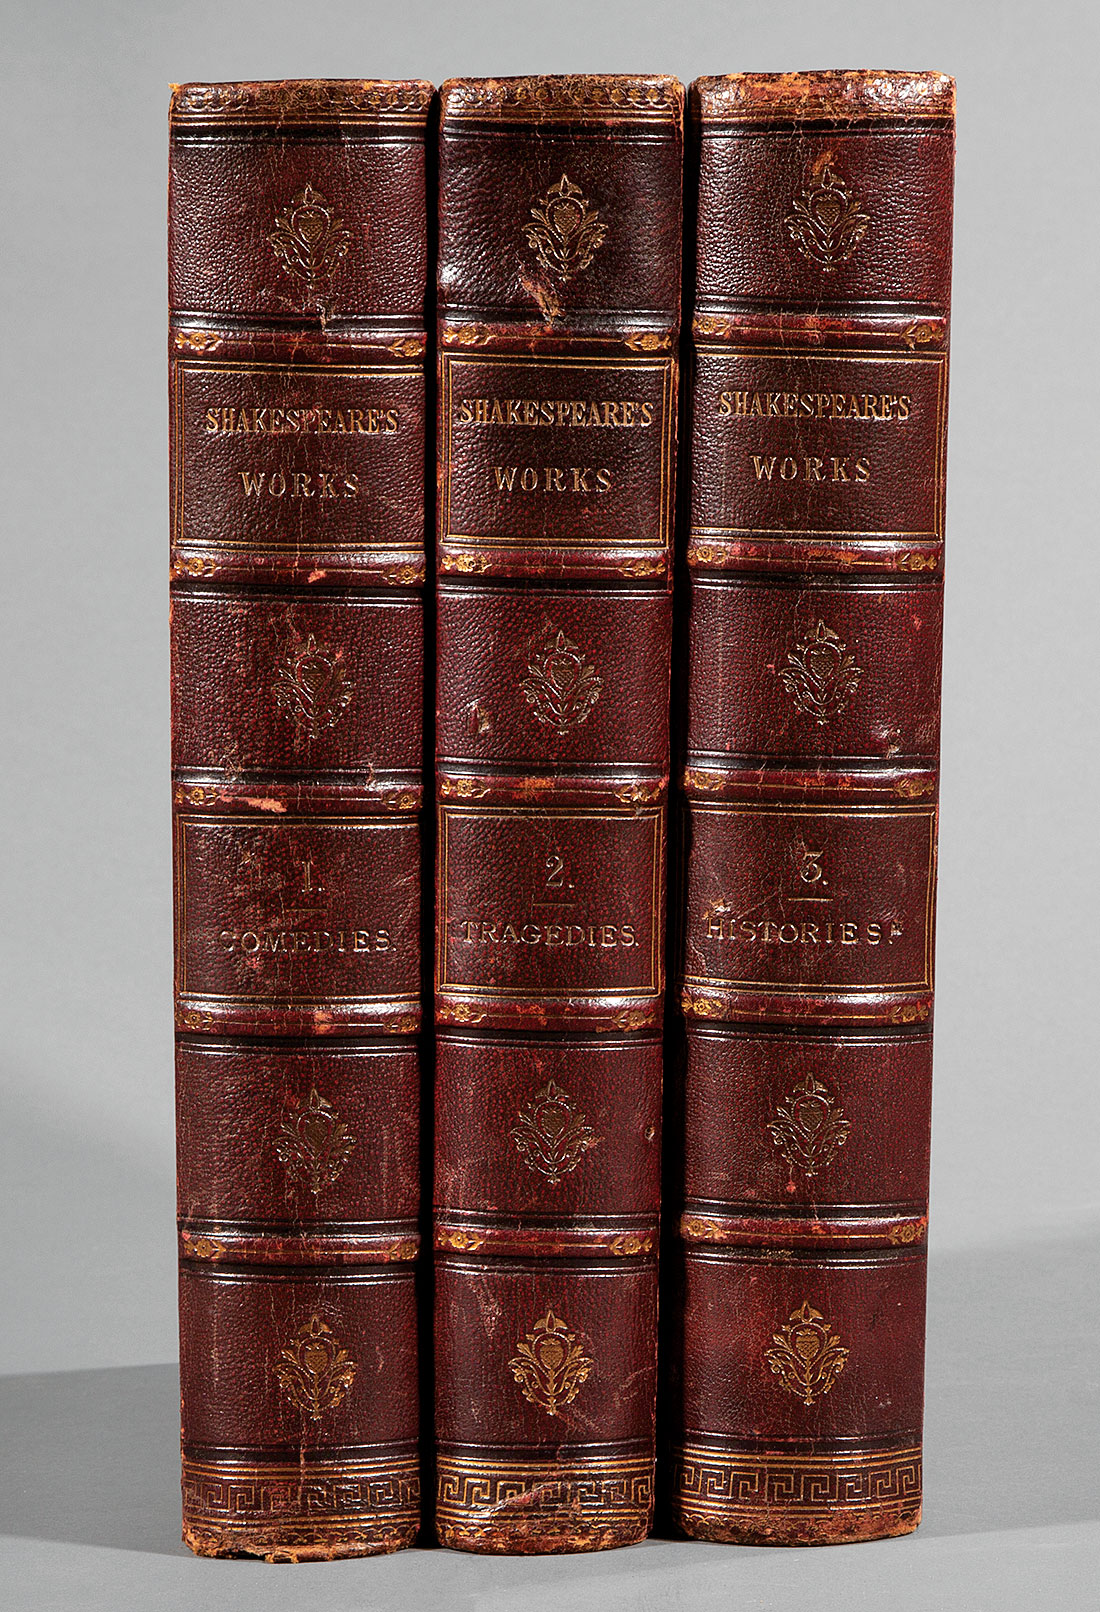 [Leather Bindings] , Shakespeare's Works, 3 volumes, gilt tooled